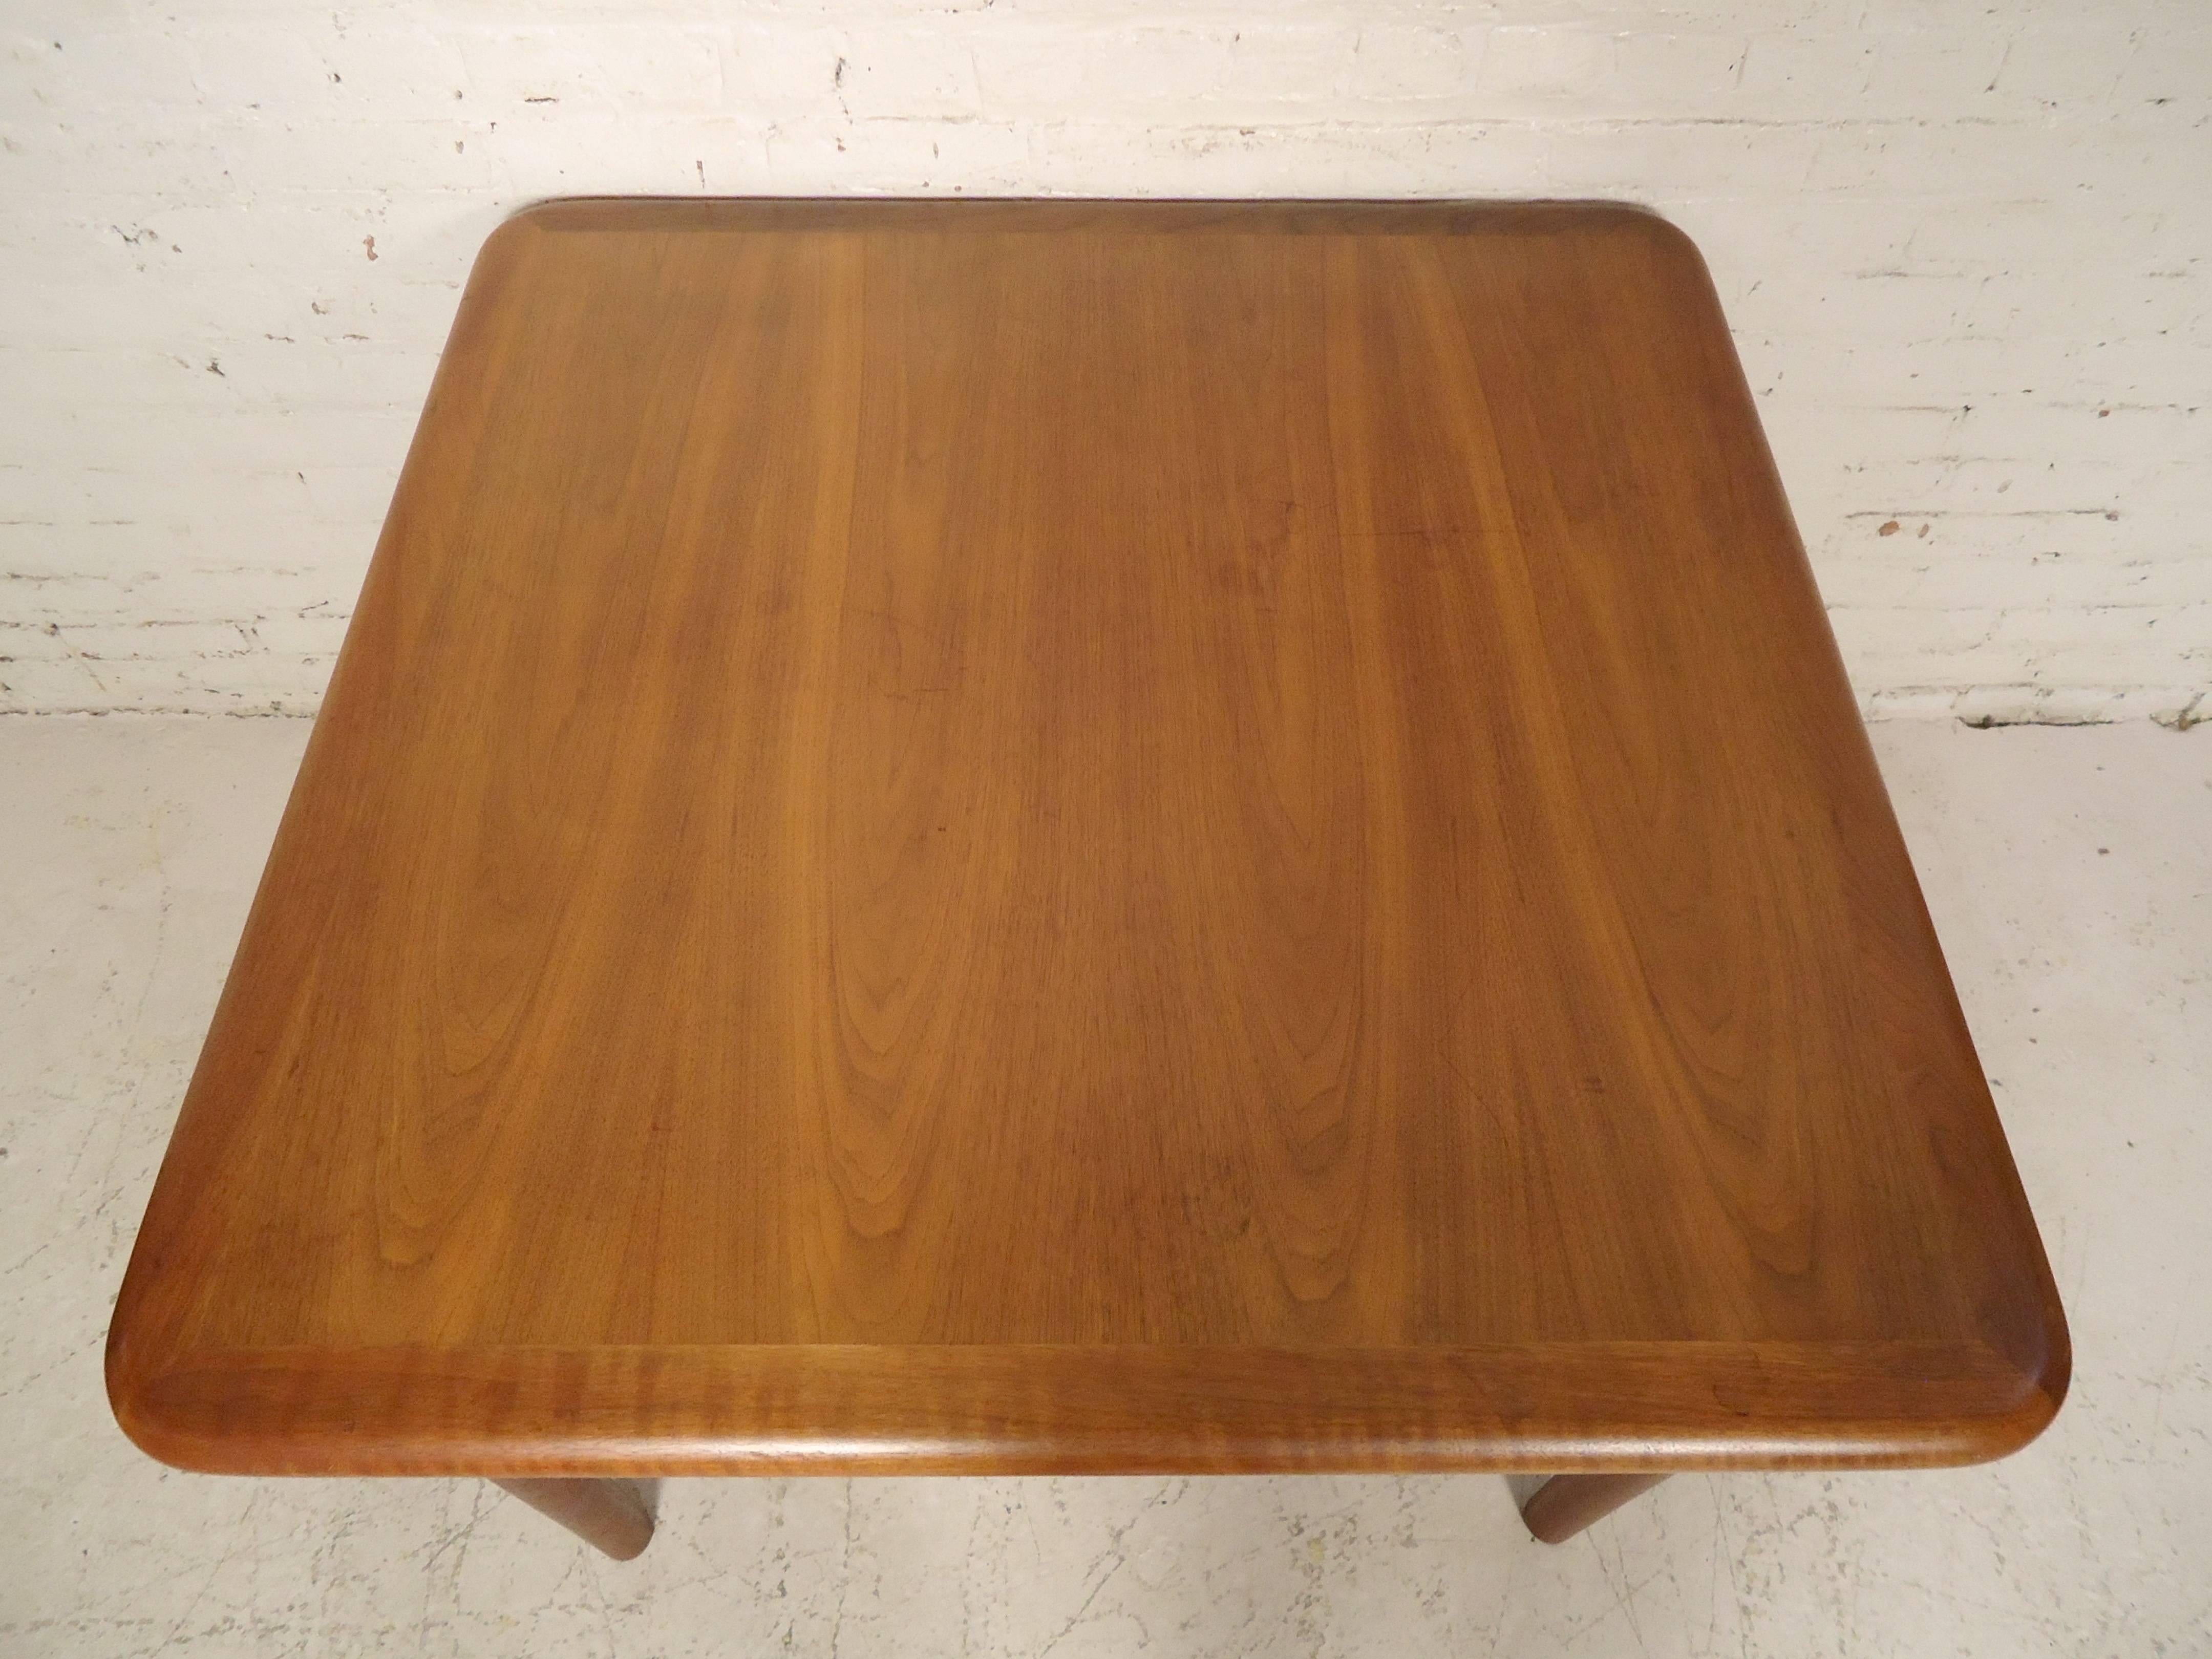 Rare dining table by Knoll with teak grain throughout. Tapering legs that screw off, rounded sides. Great for smaller dining rooms.

(Please confirm item location - NY or NJ - with dealer).
 